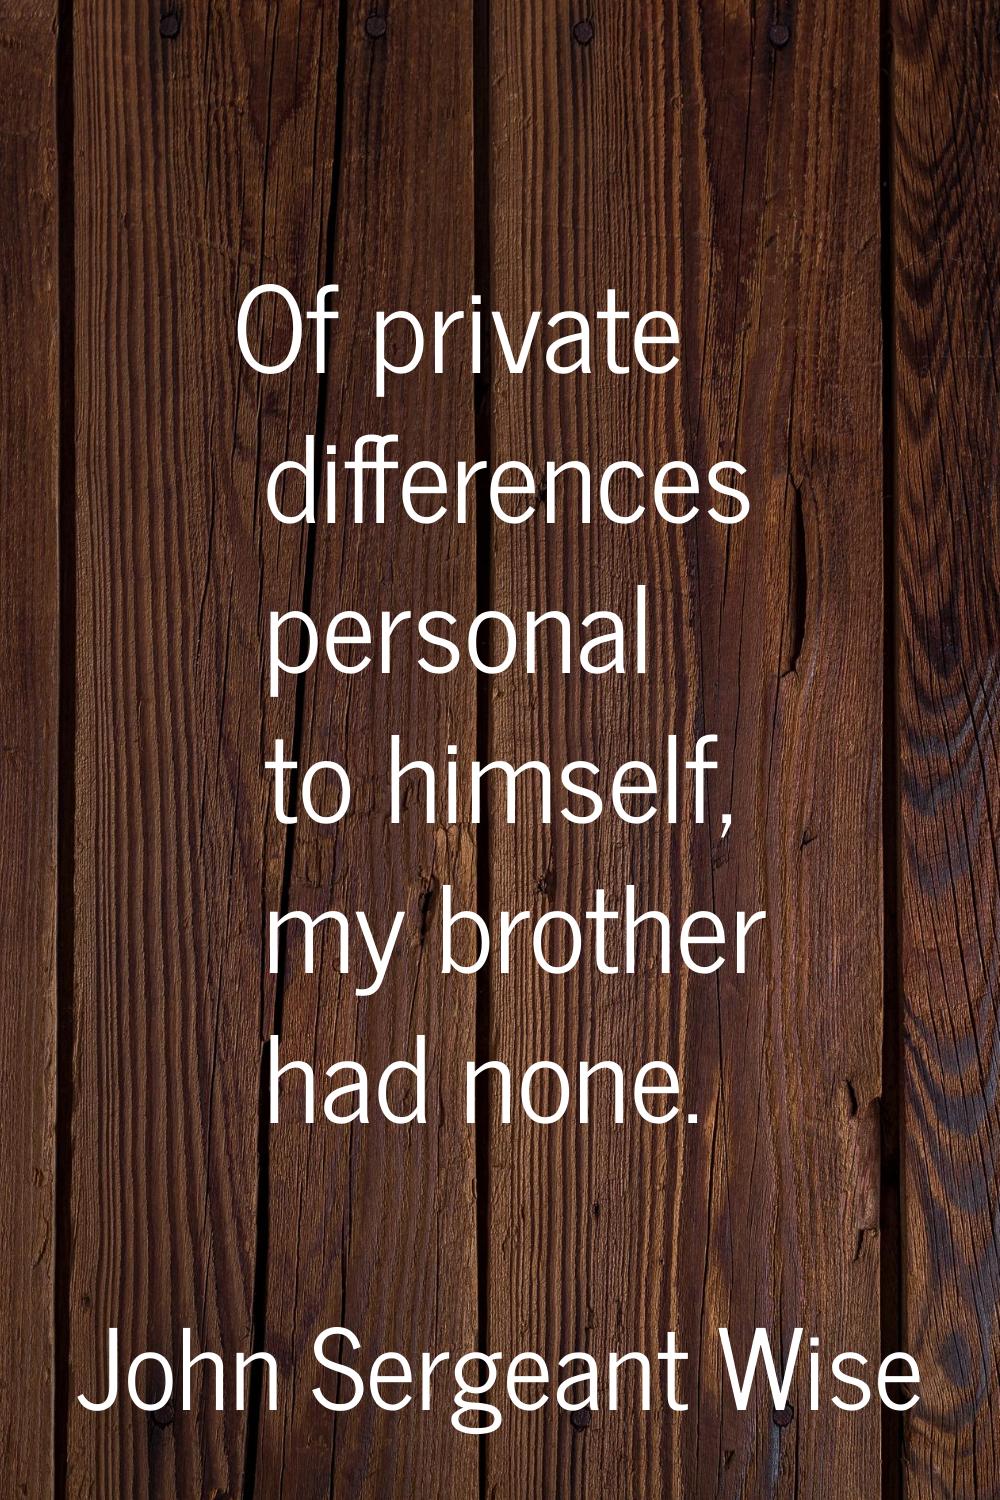 Of private differences personal to himself, my brother had none.